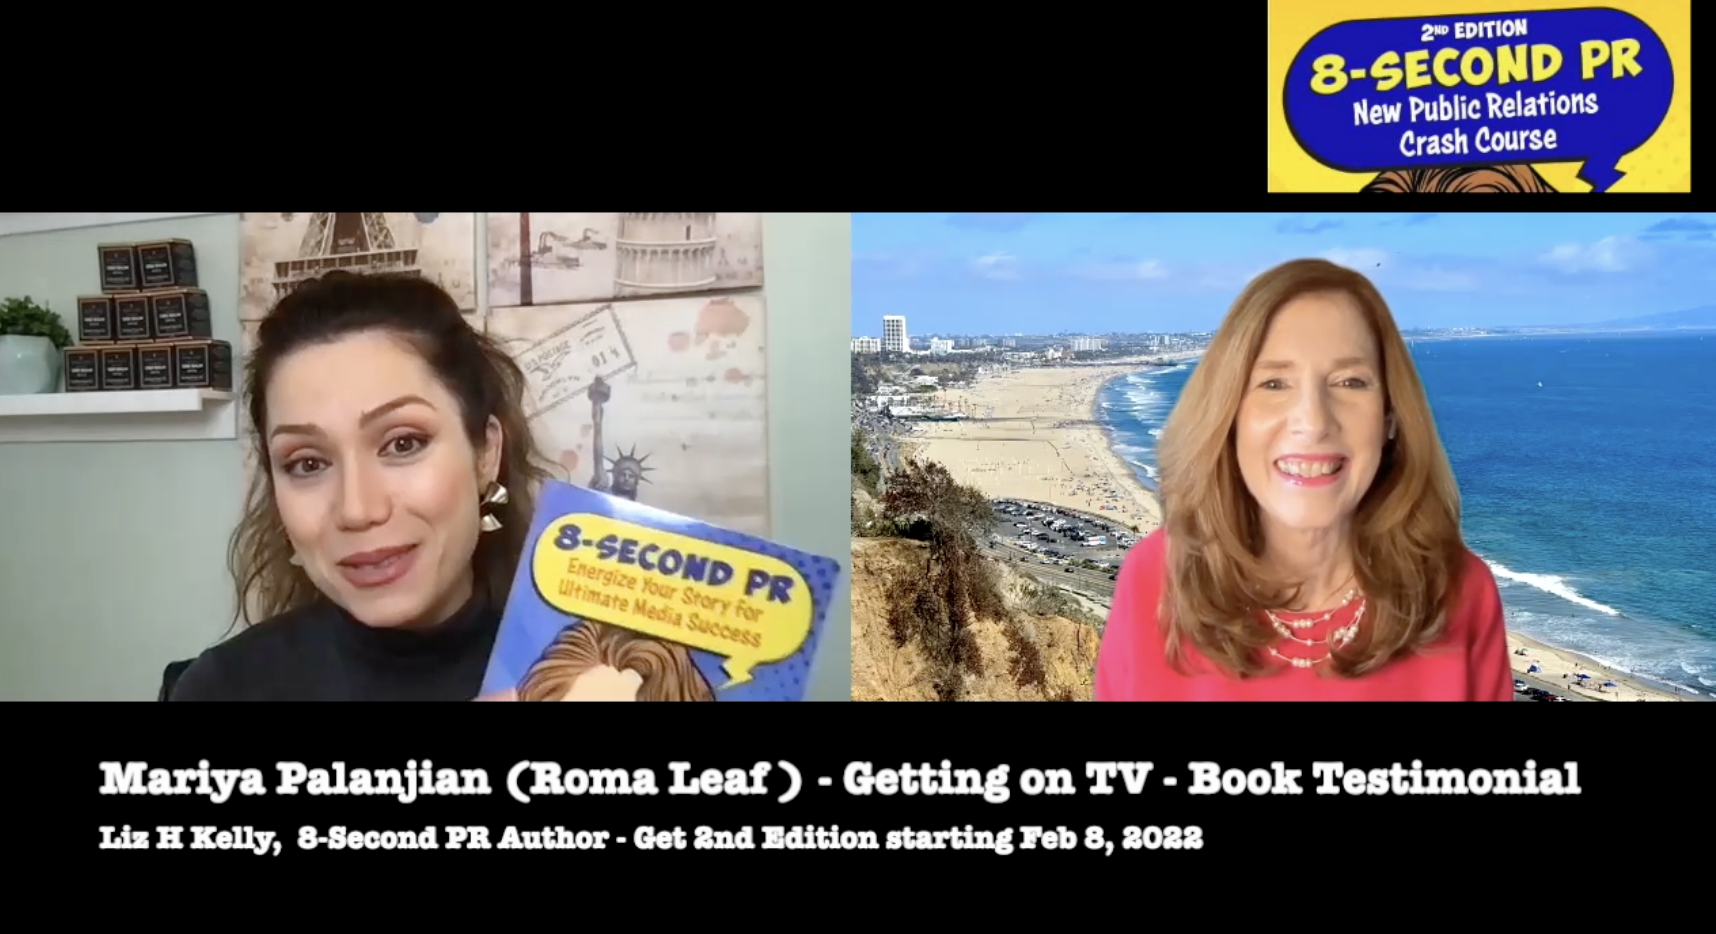 Small Business Founder/CEO Mariya Palanjian (Roma Leaf and Globafly), explains how she got $50k in publicity from 1 TV interview after reading "8-Second PR" publicity tips book.